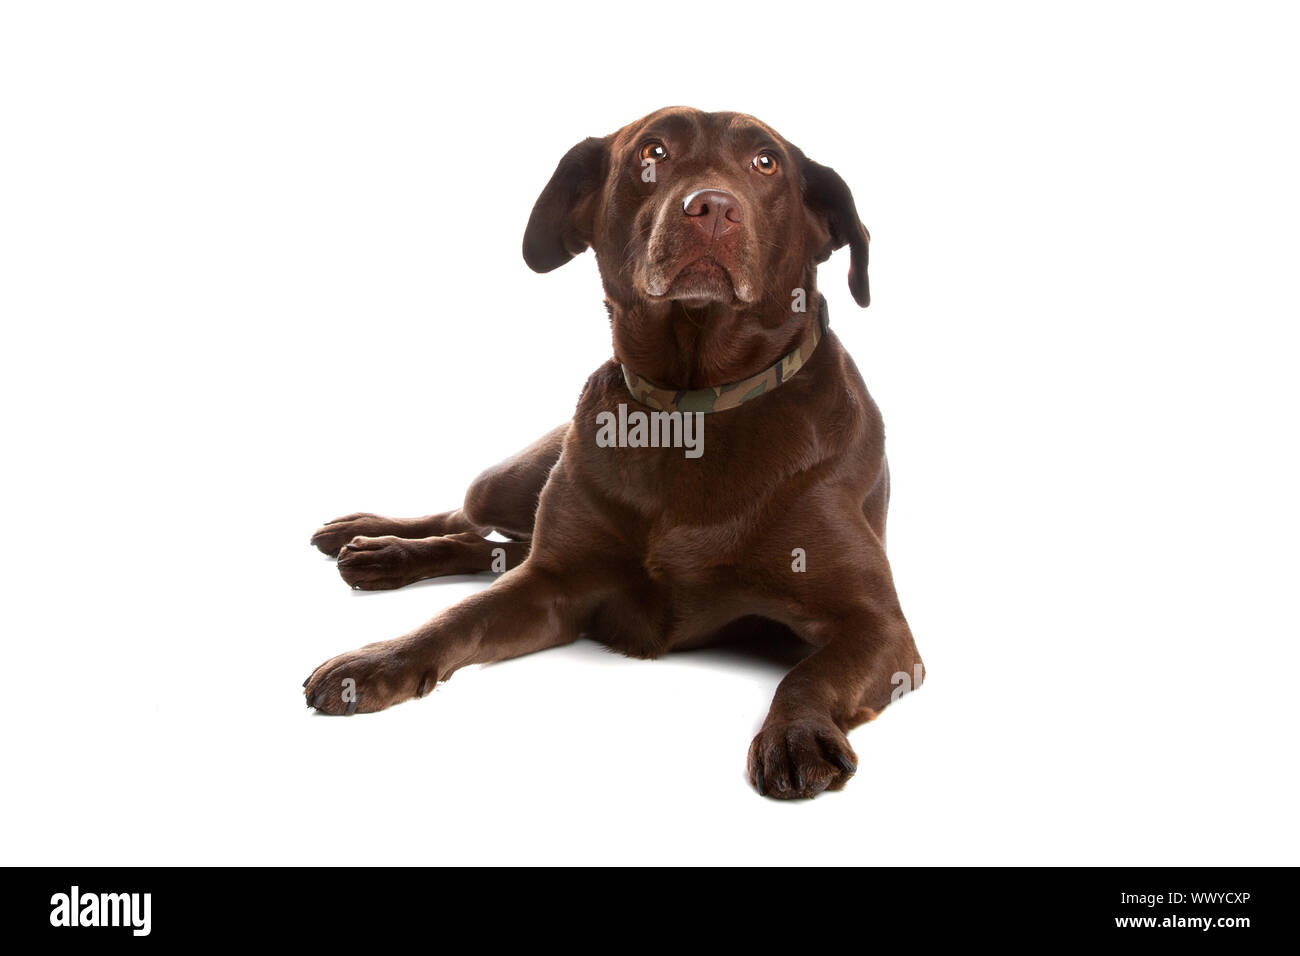 Chocolate labrador retriever dog lying and looking up, isolated on a white background. Stock Photo